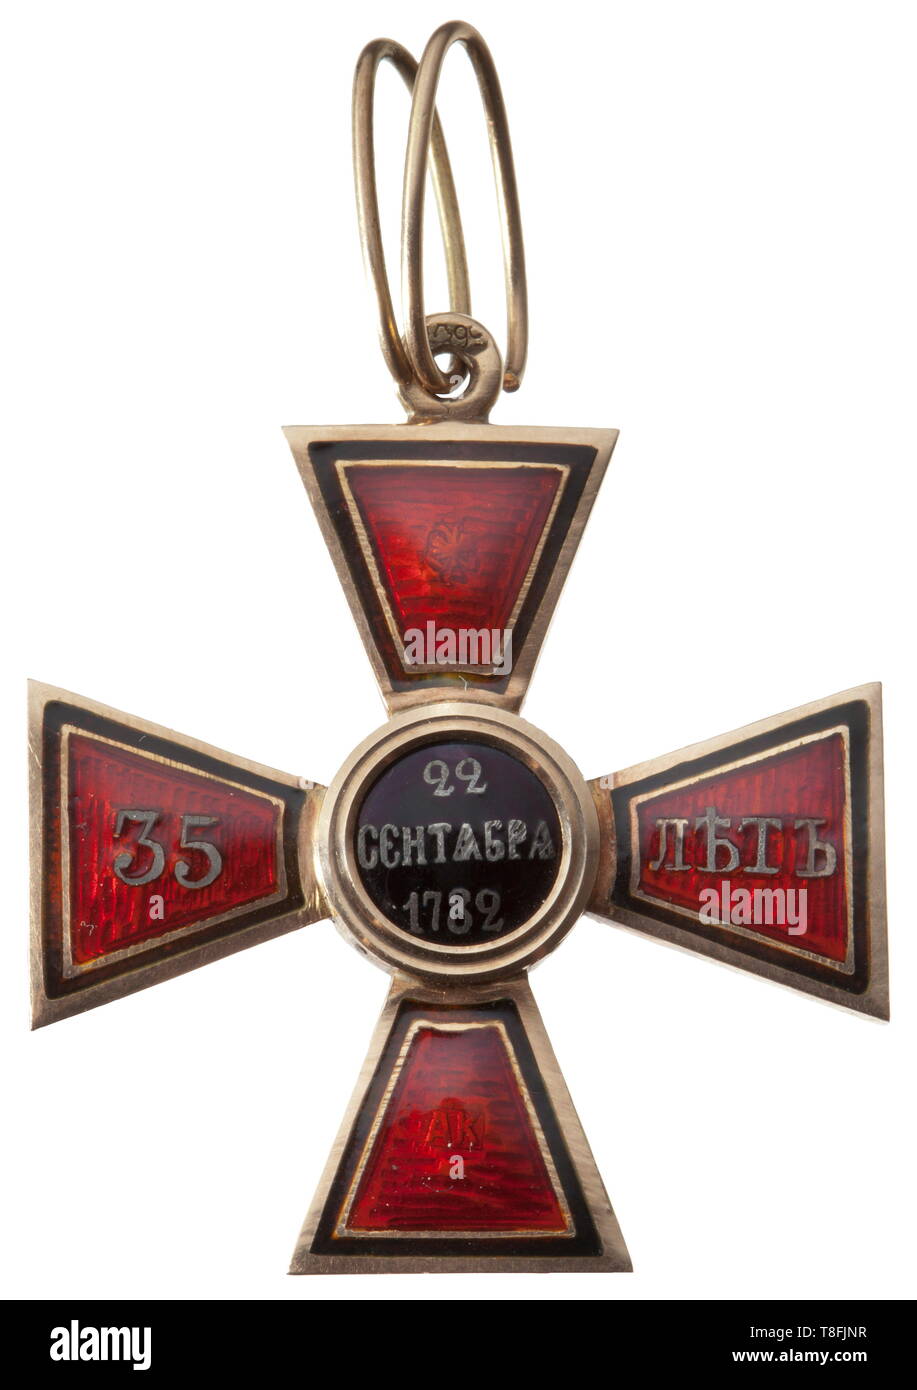 An Order of St. Vladimir, 4th Class Cross for 35 Years of Service Russia circa 1900. Gold, enameled in places, the reverse cross arms with Cyrillic punches 'AK' and a double eagle. The eyelet with mark of fineness for '56' zolotniki and inspection master's mark 'Ja.L' for Jakov Liapunov. Dimensions 40 x 35 mm, weight 7 g. In excellent condition. historic, historical, medal, decoration, medals, decorations, badge of honour, badge of honor, badges of honour, badges of honor, 20th century, Additional-Rights-Clearance-Info-Not-Available Stock Photo